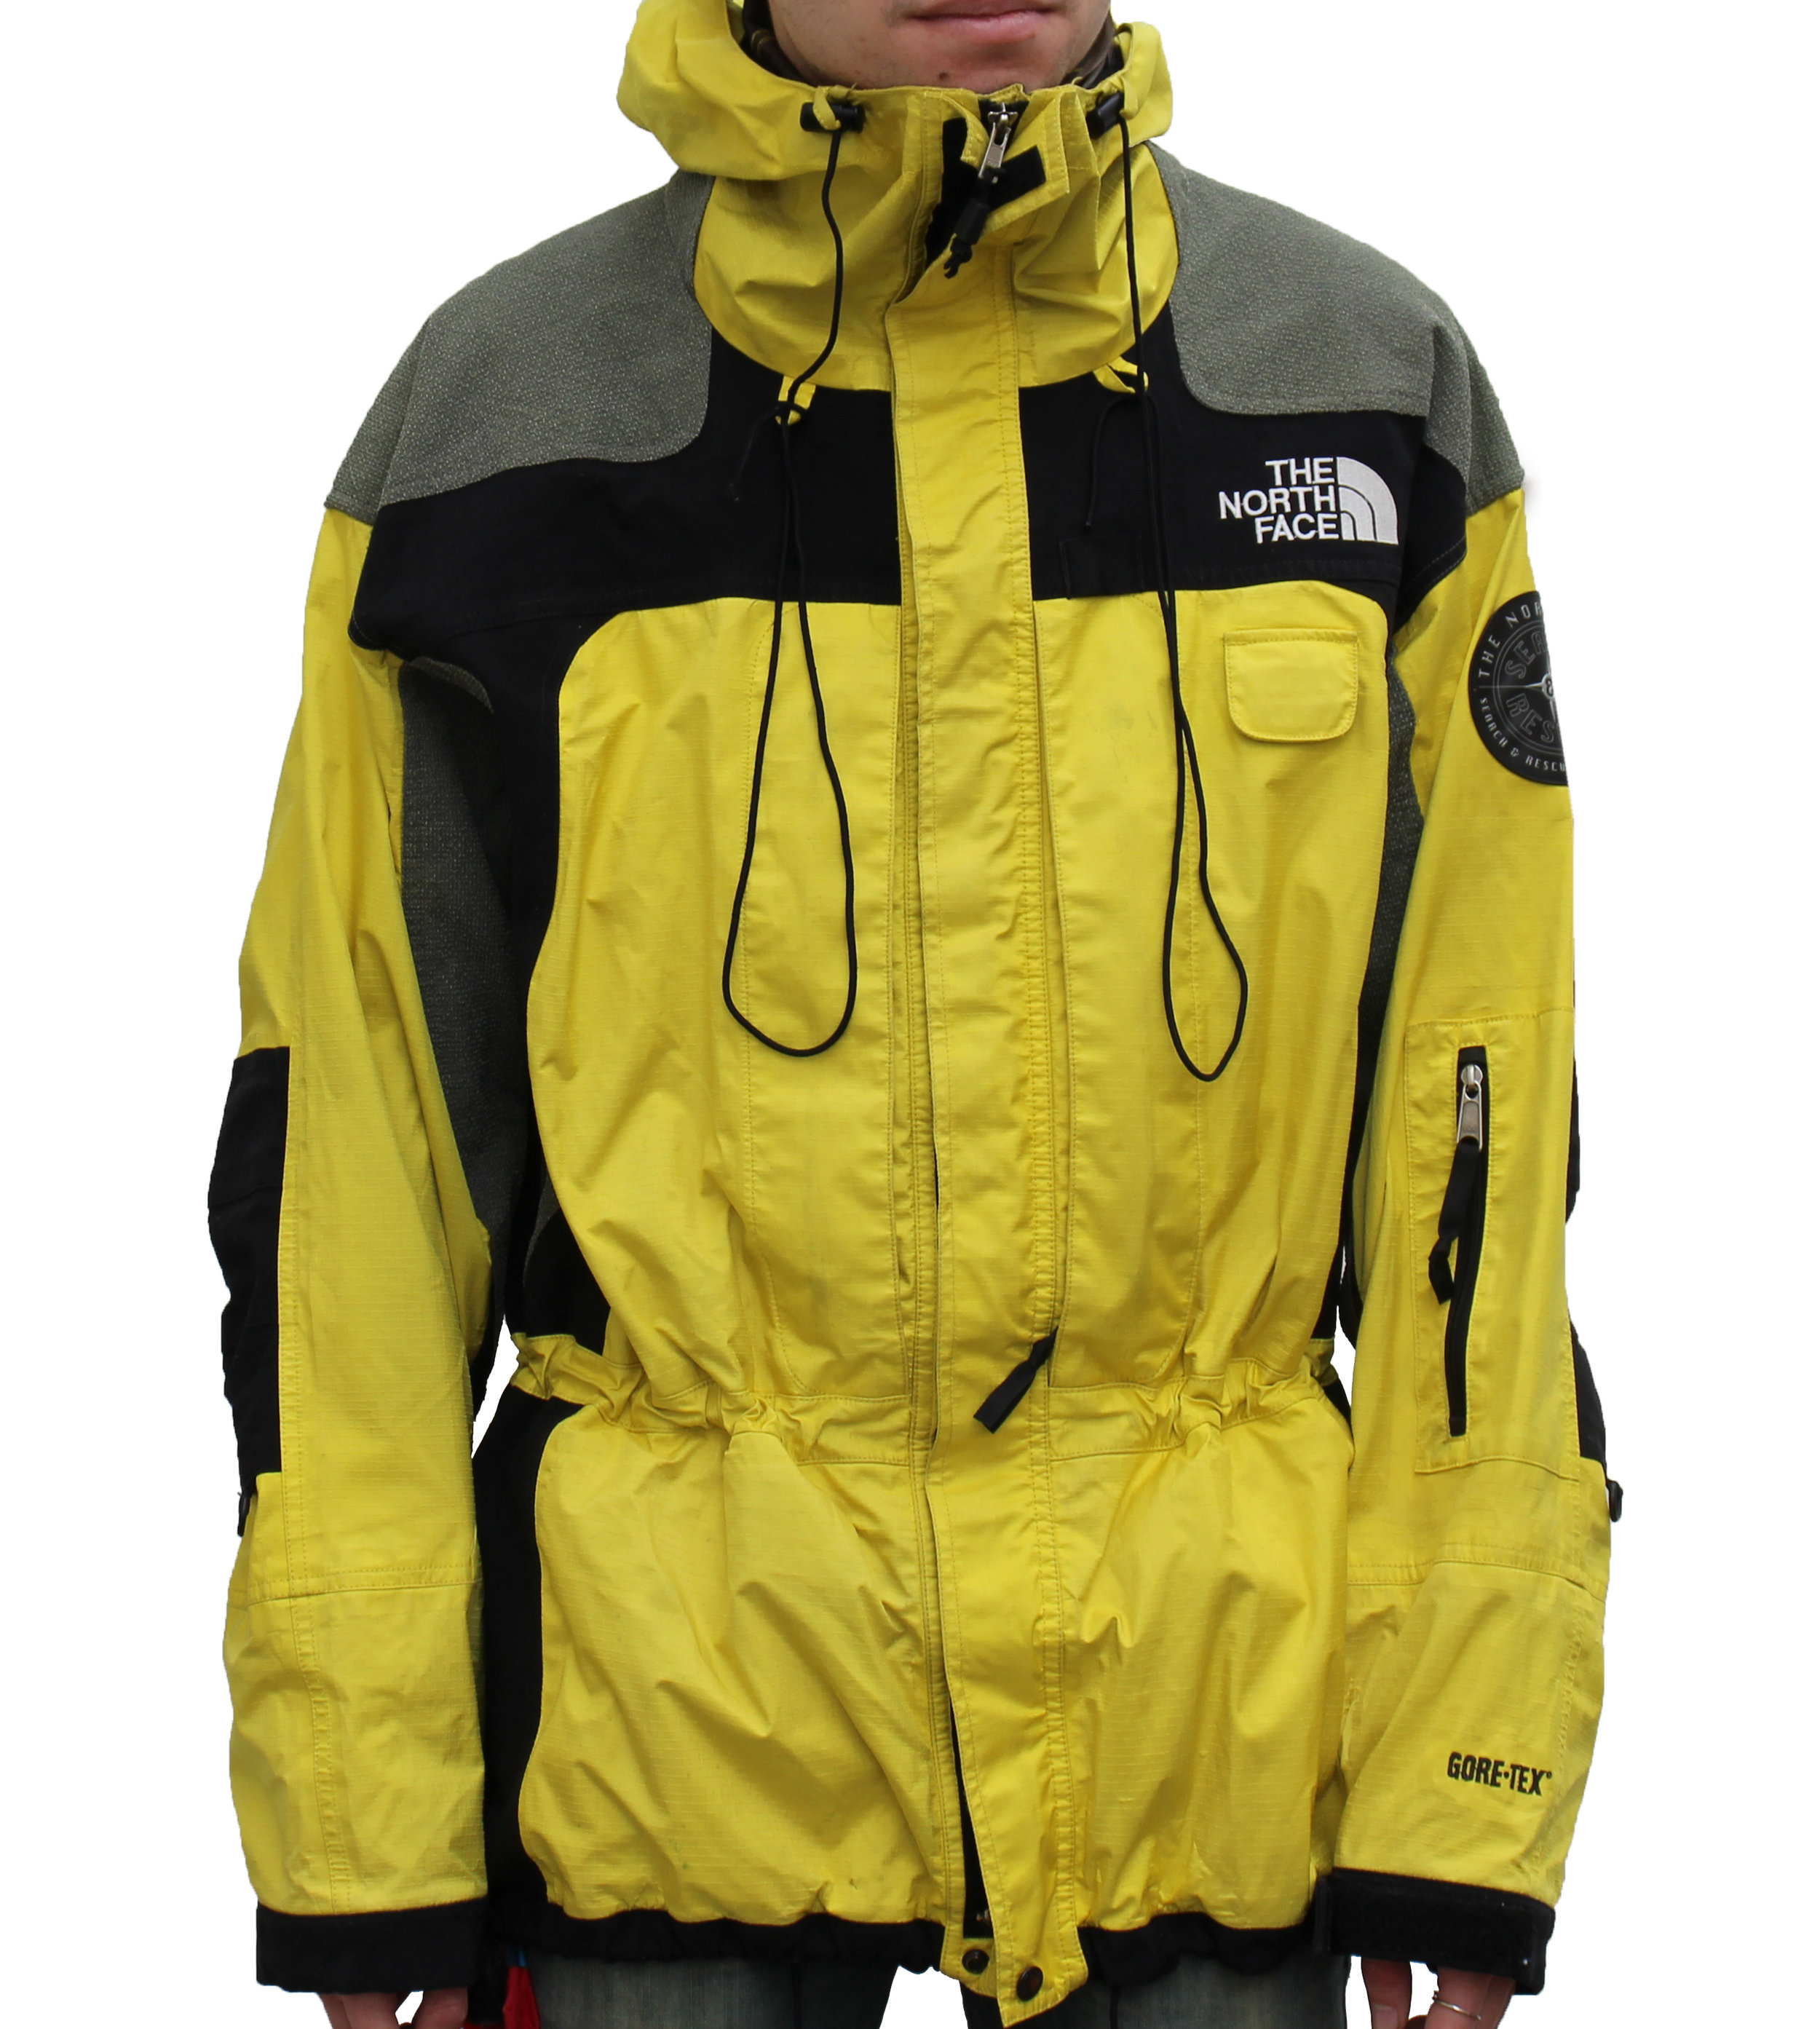 the north face search and rescue jacket